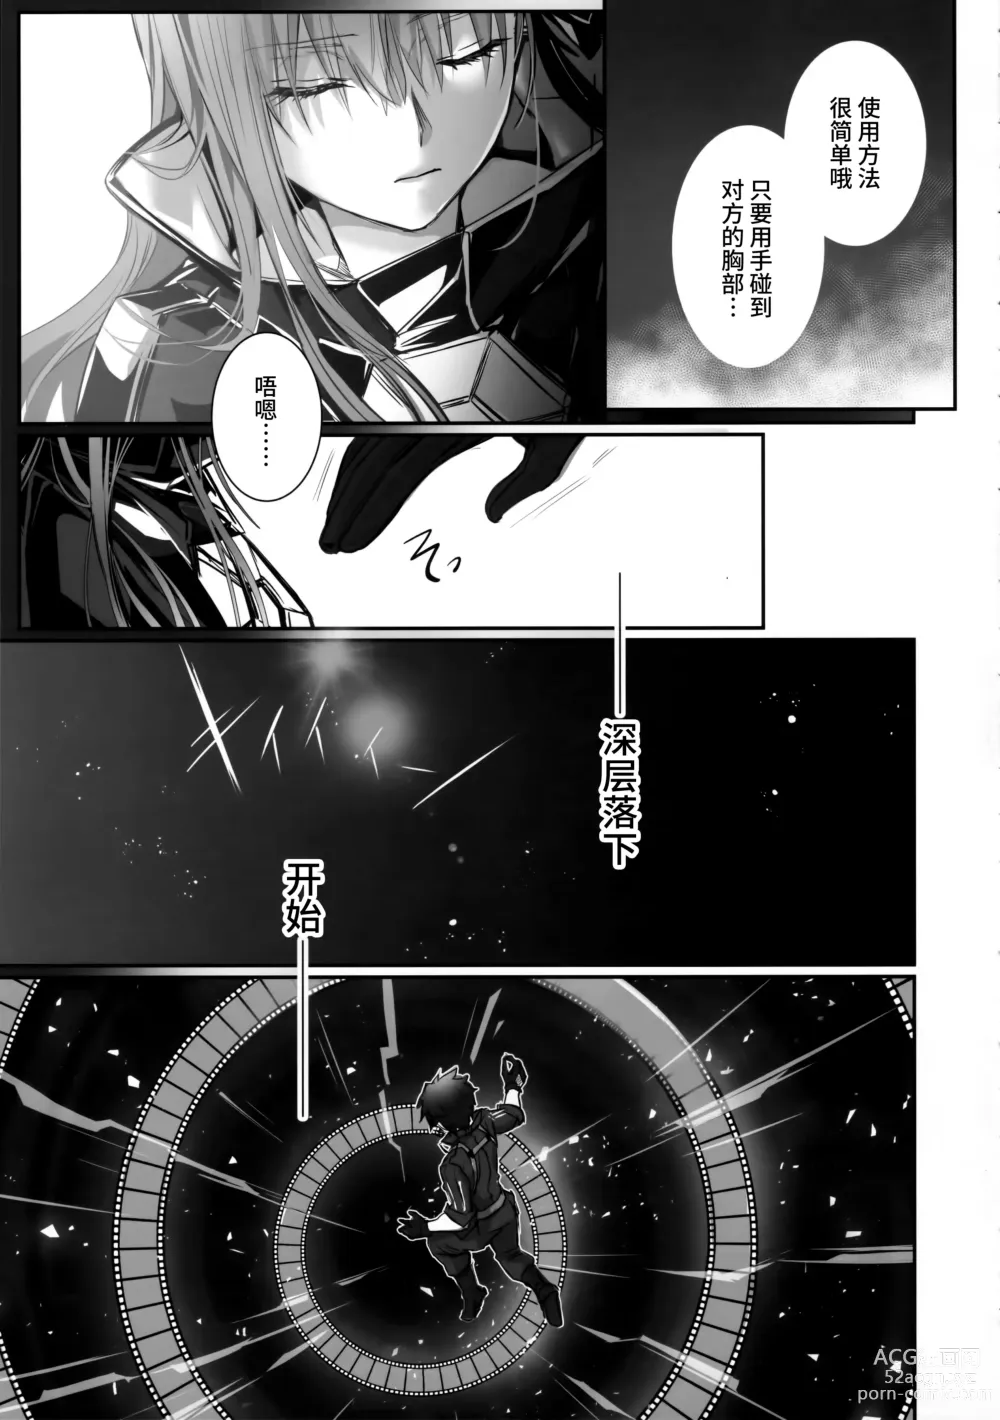 Page 6 of doujinshi the innermoSt of the Girl